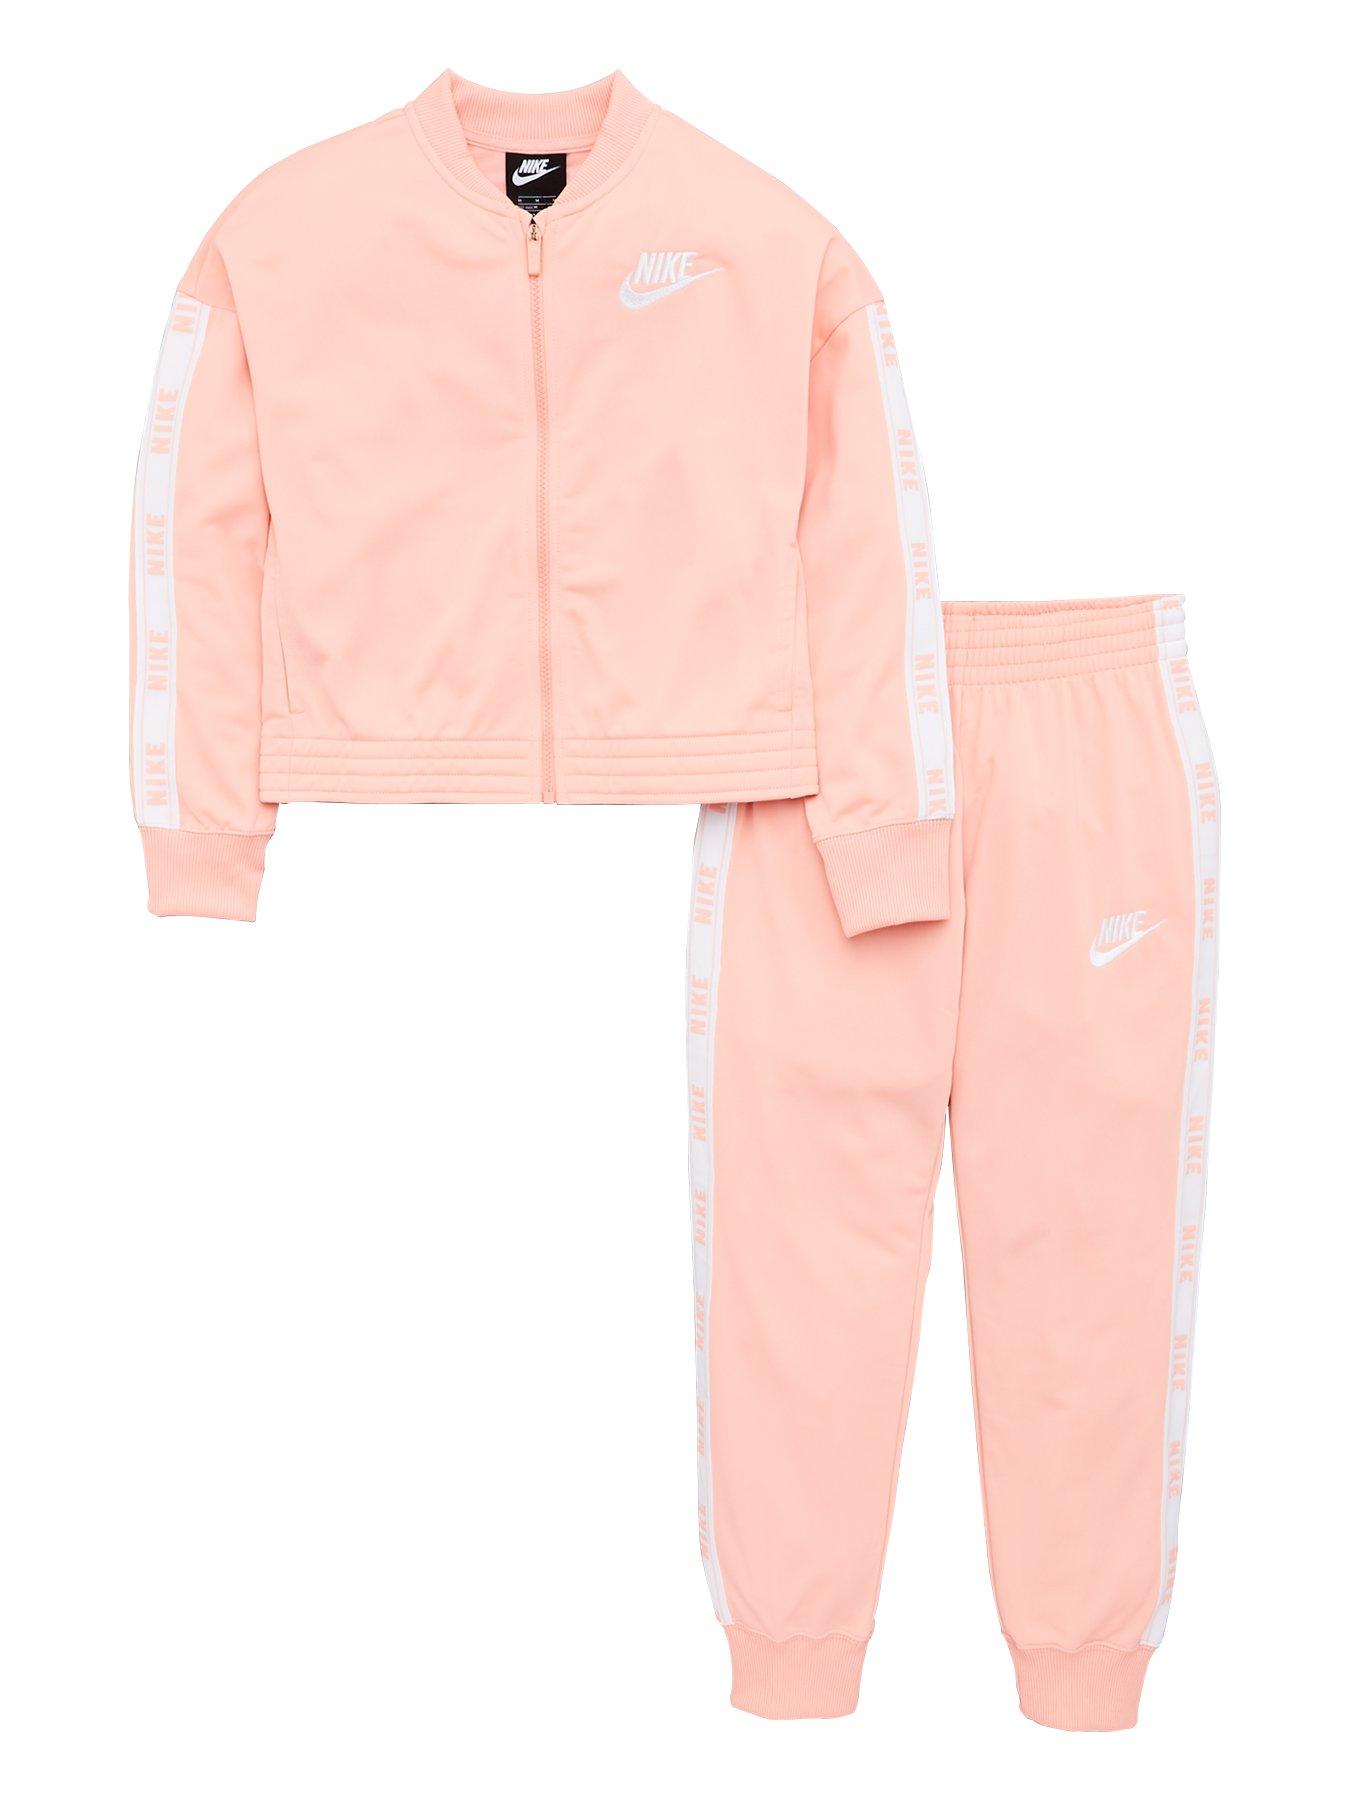 white and pink tracksuit